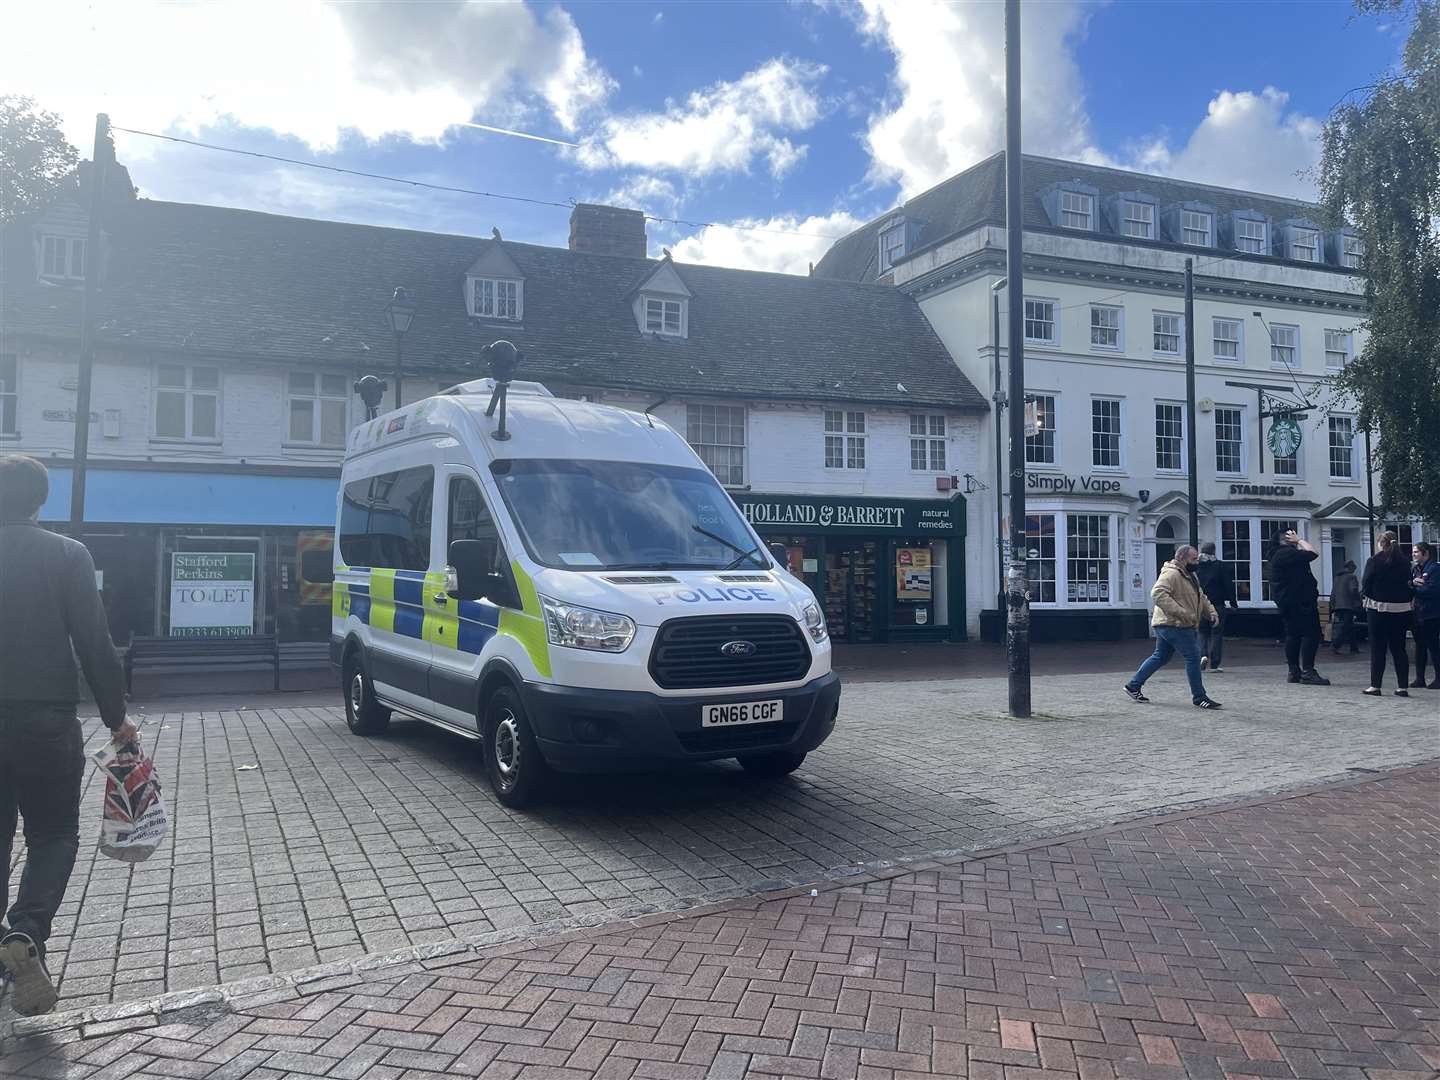 A police van was parked in the high street at lunchtime on Tuesday